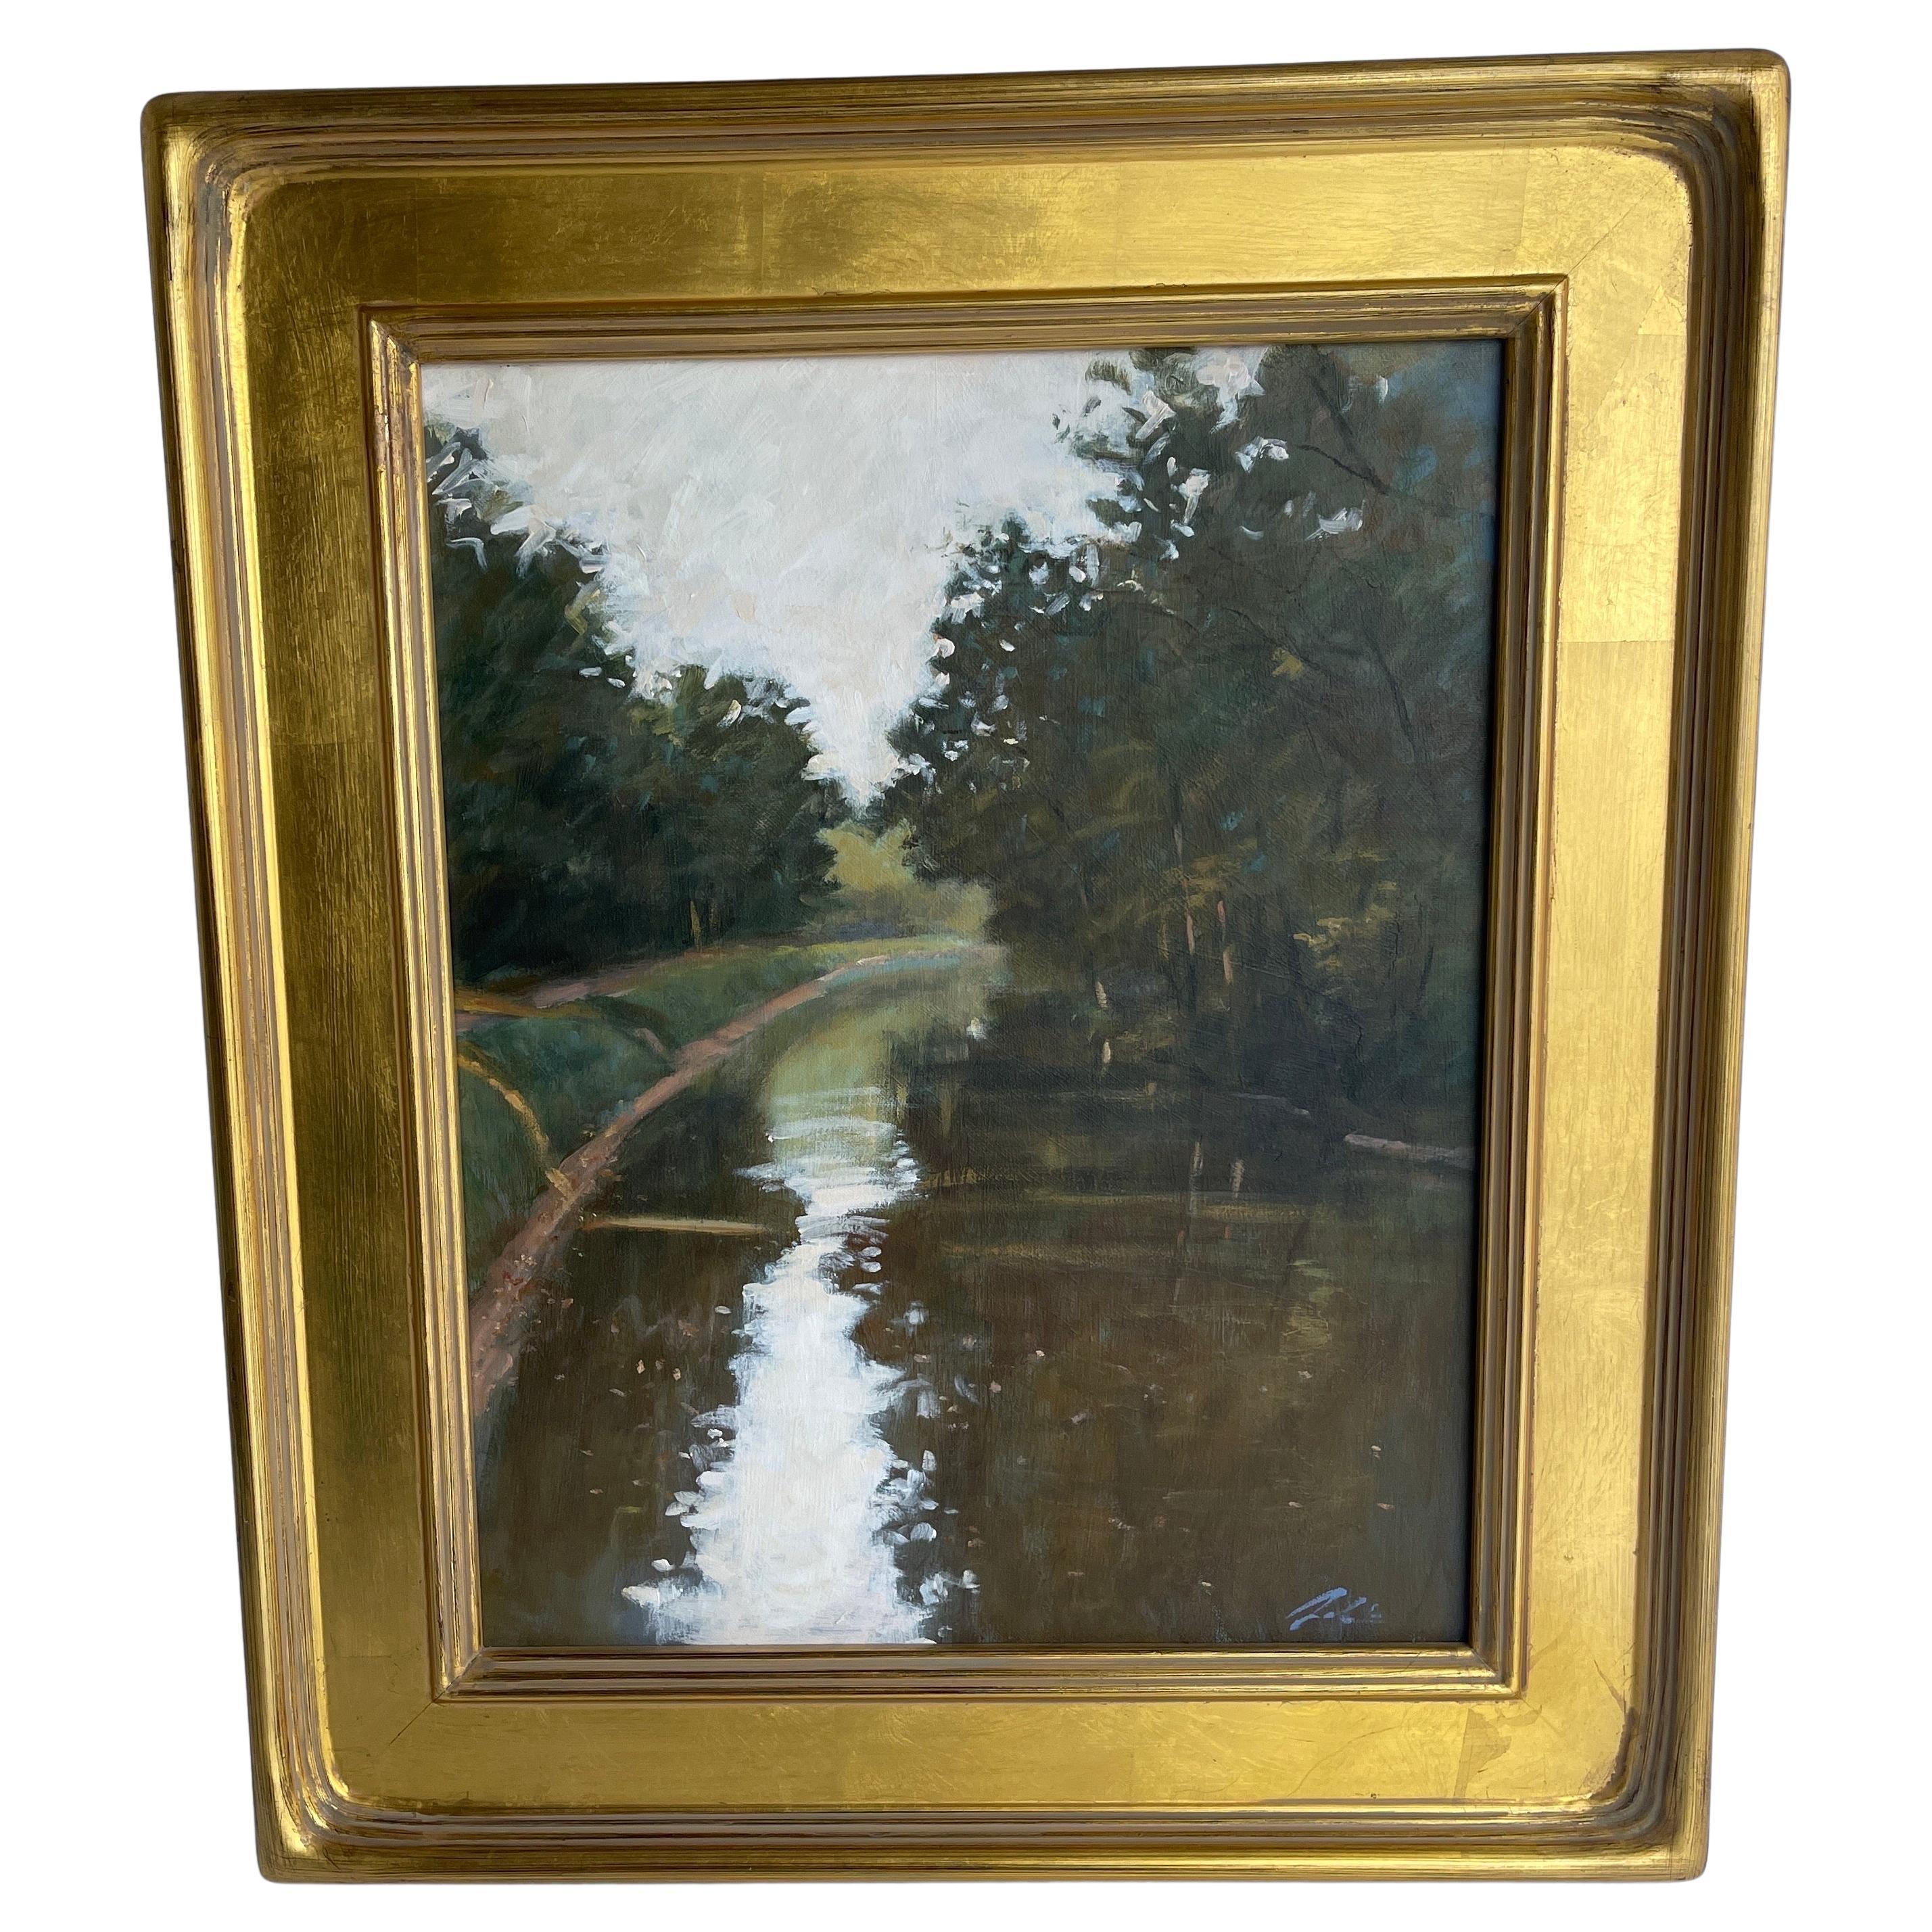 Signed Landscape Oil Painting of Canal in Gold Gilt Frame

Original oil painting titled Warm Shadows depicting a serene canal with calm and restful water. Lush green trees surround this well-known waterway. The Delaware and Raritan Canal (D&R)